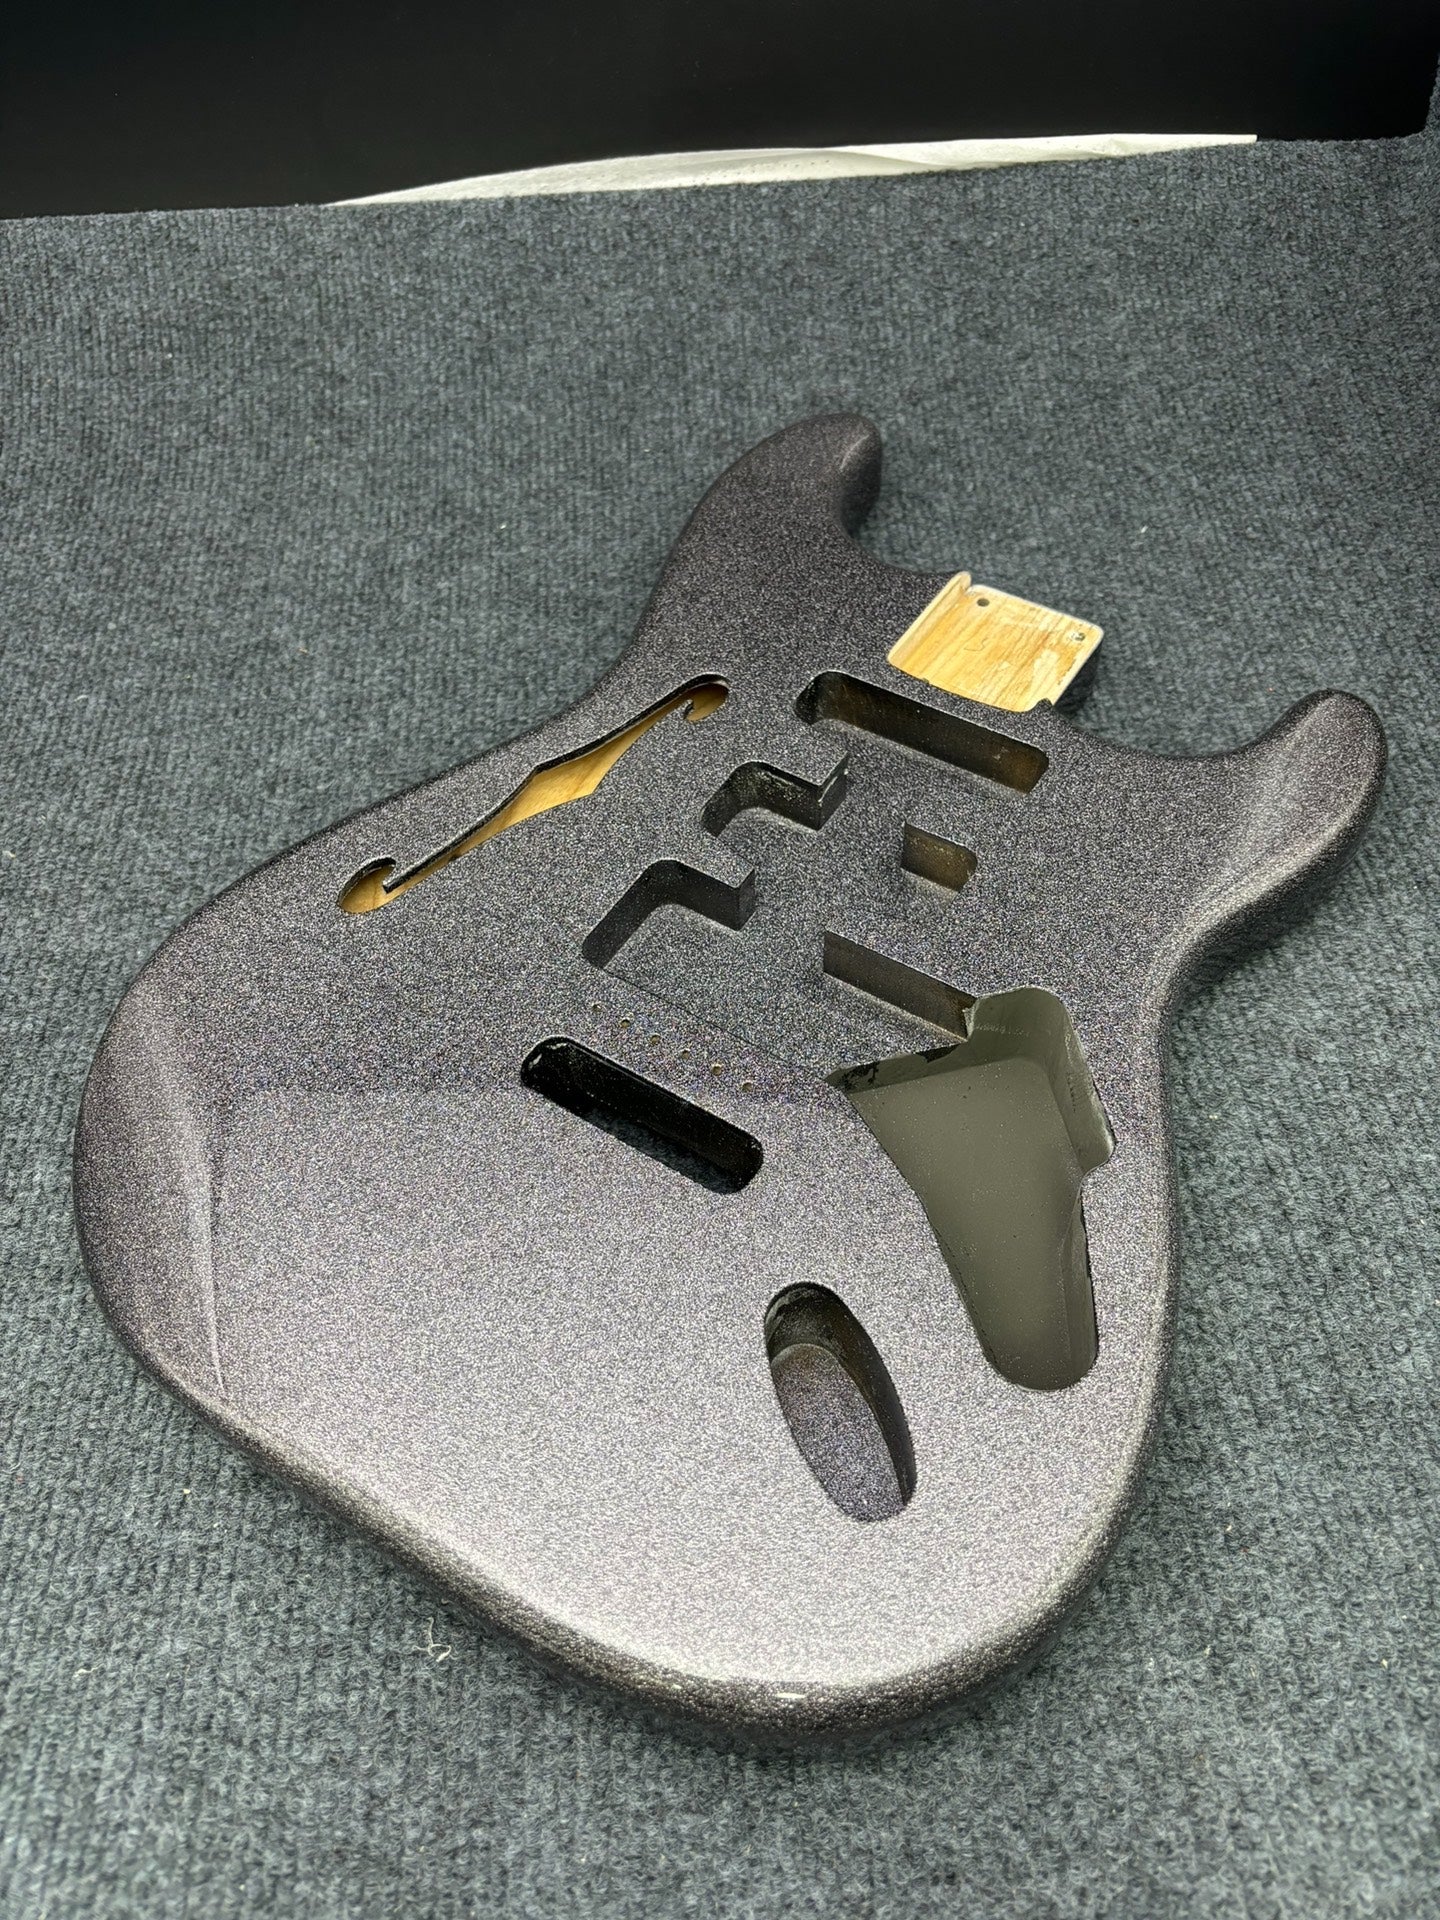 The semi-hollow body of the adapted ST electric guitar is 55.9mm wide and 17mm deep, with standard brass vibrato bridge and customized circuit.